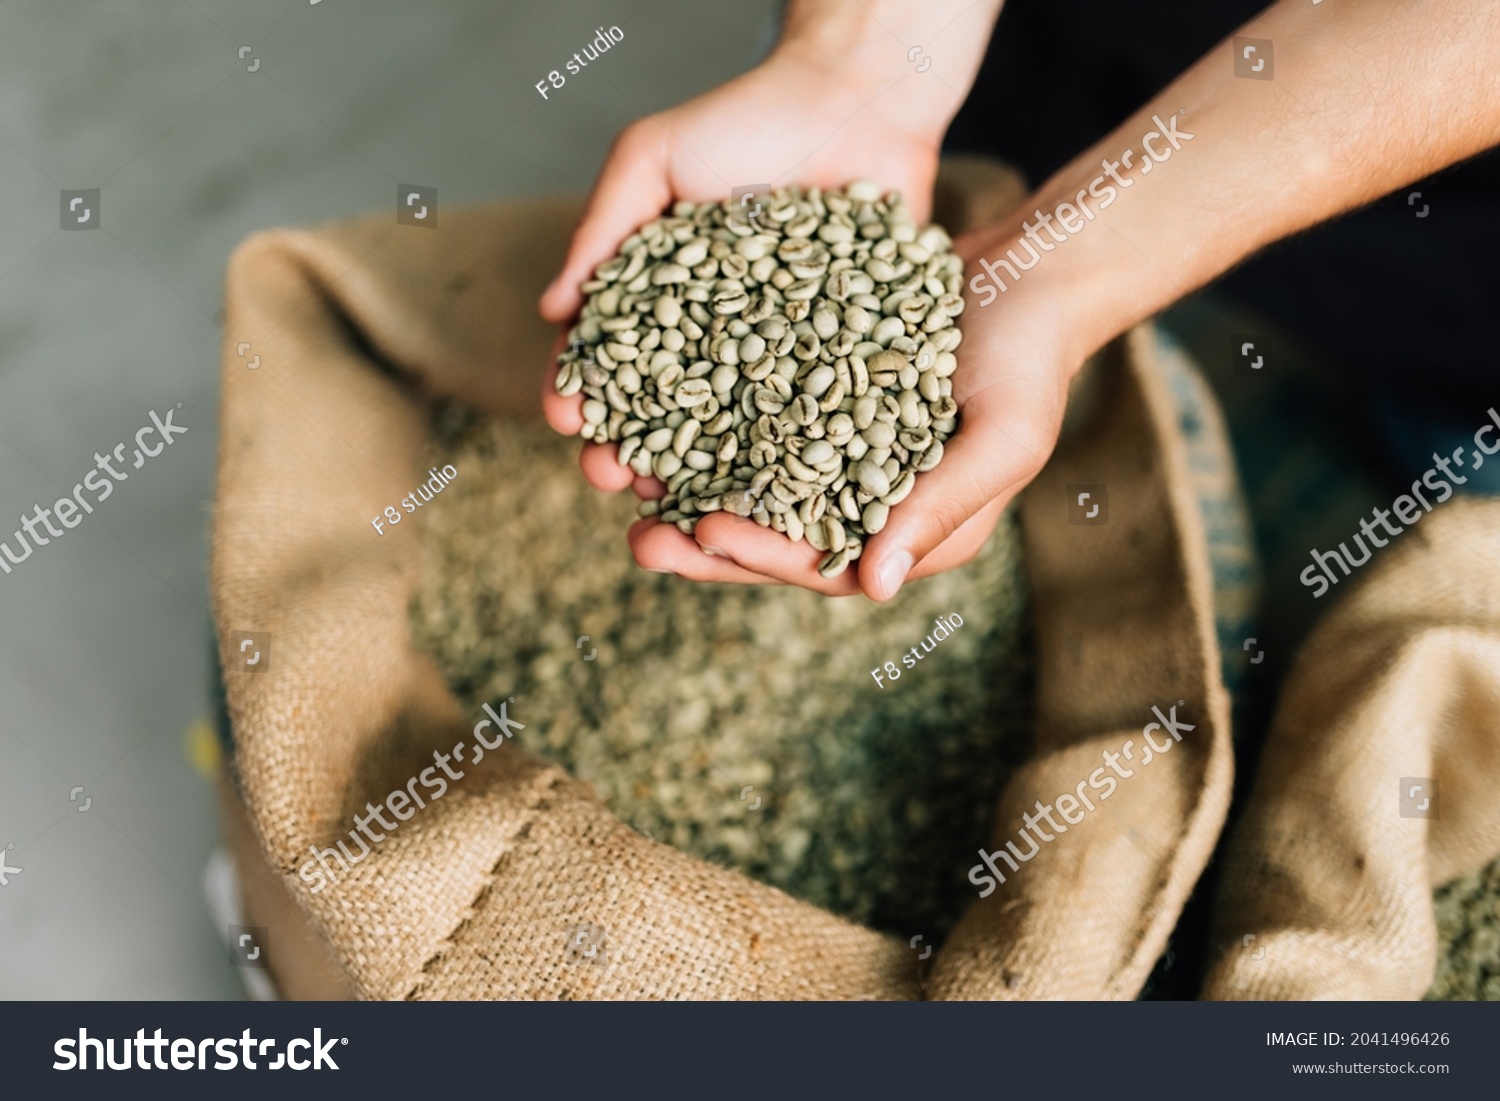 Hands of man showing sack full of green coffee beans #2041496426